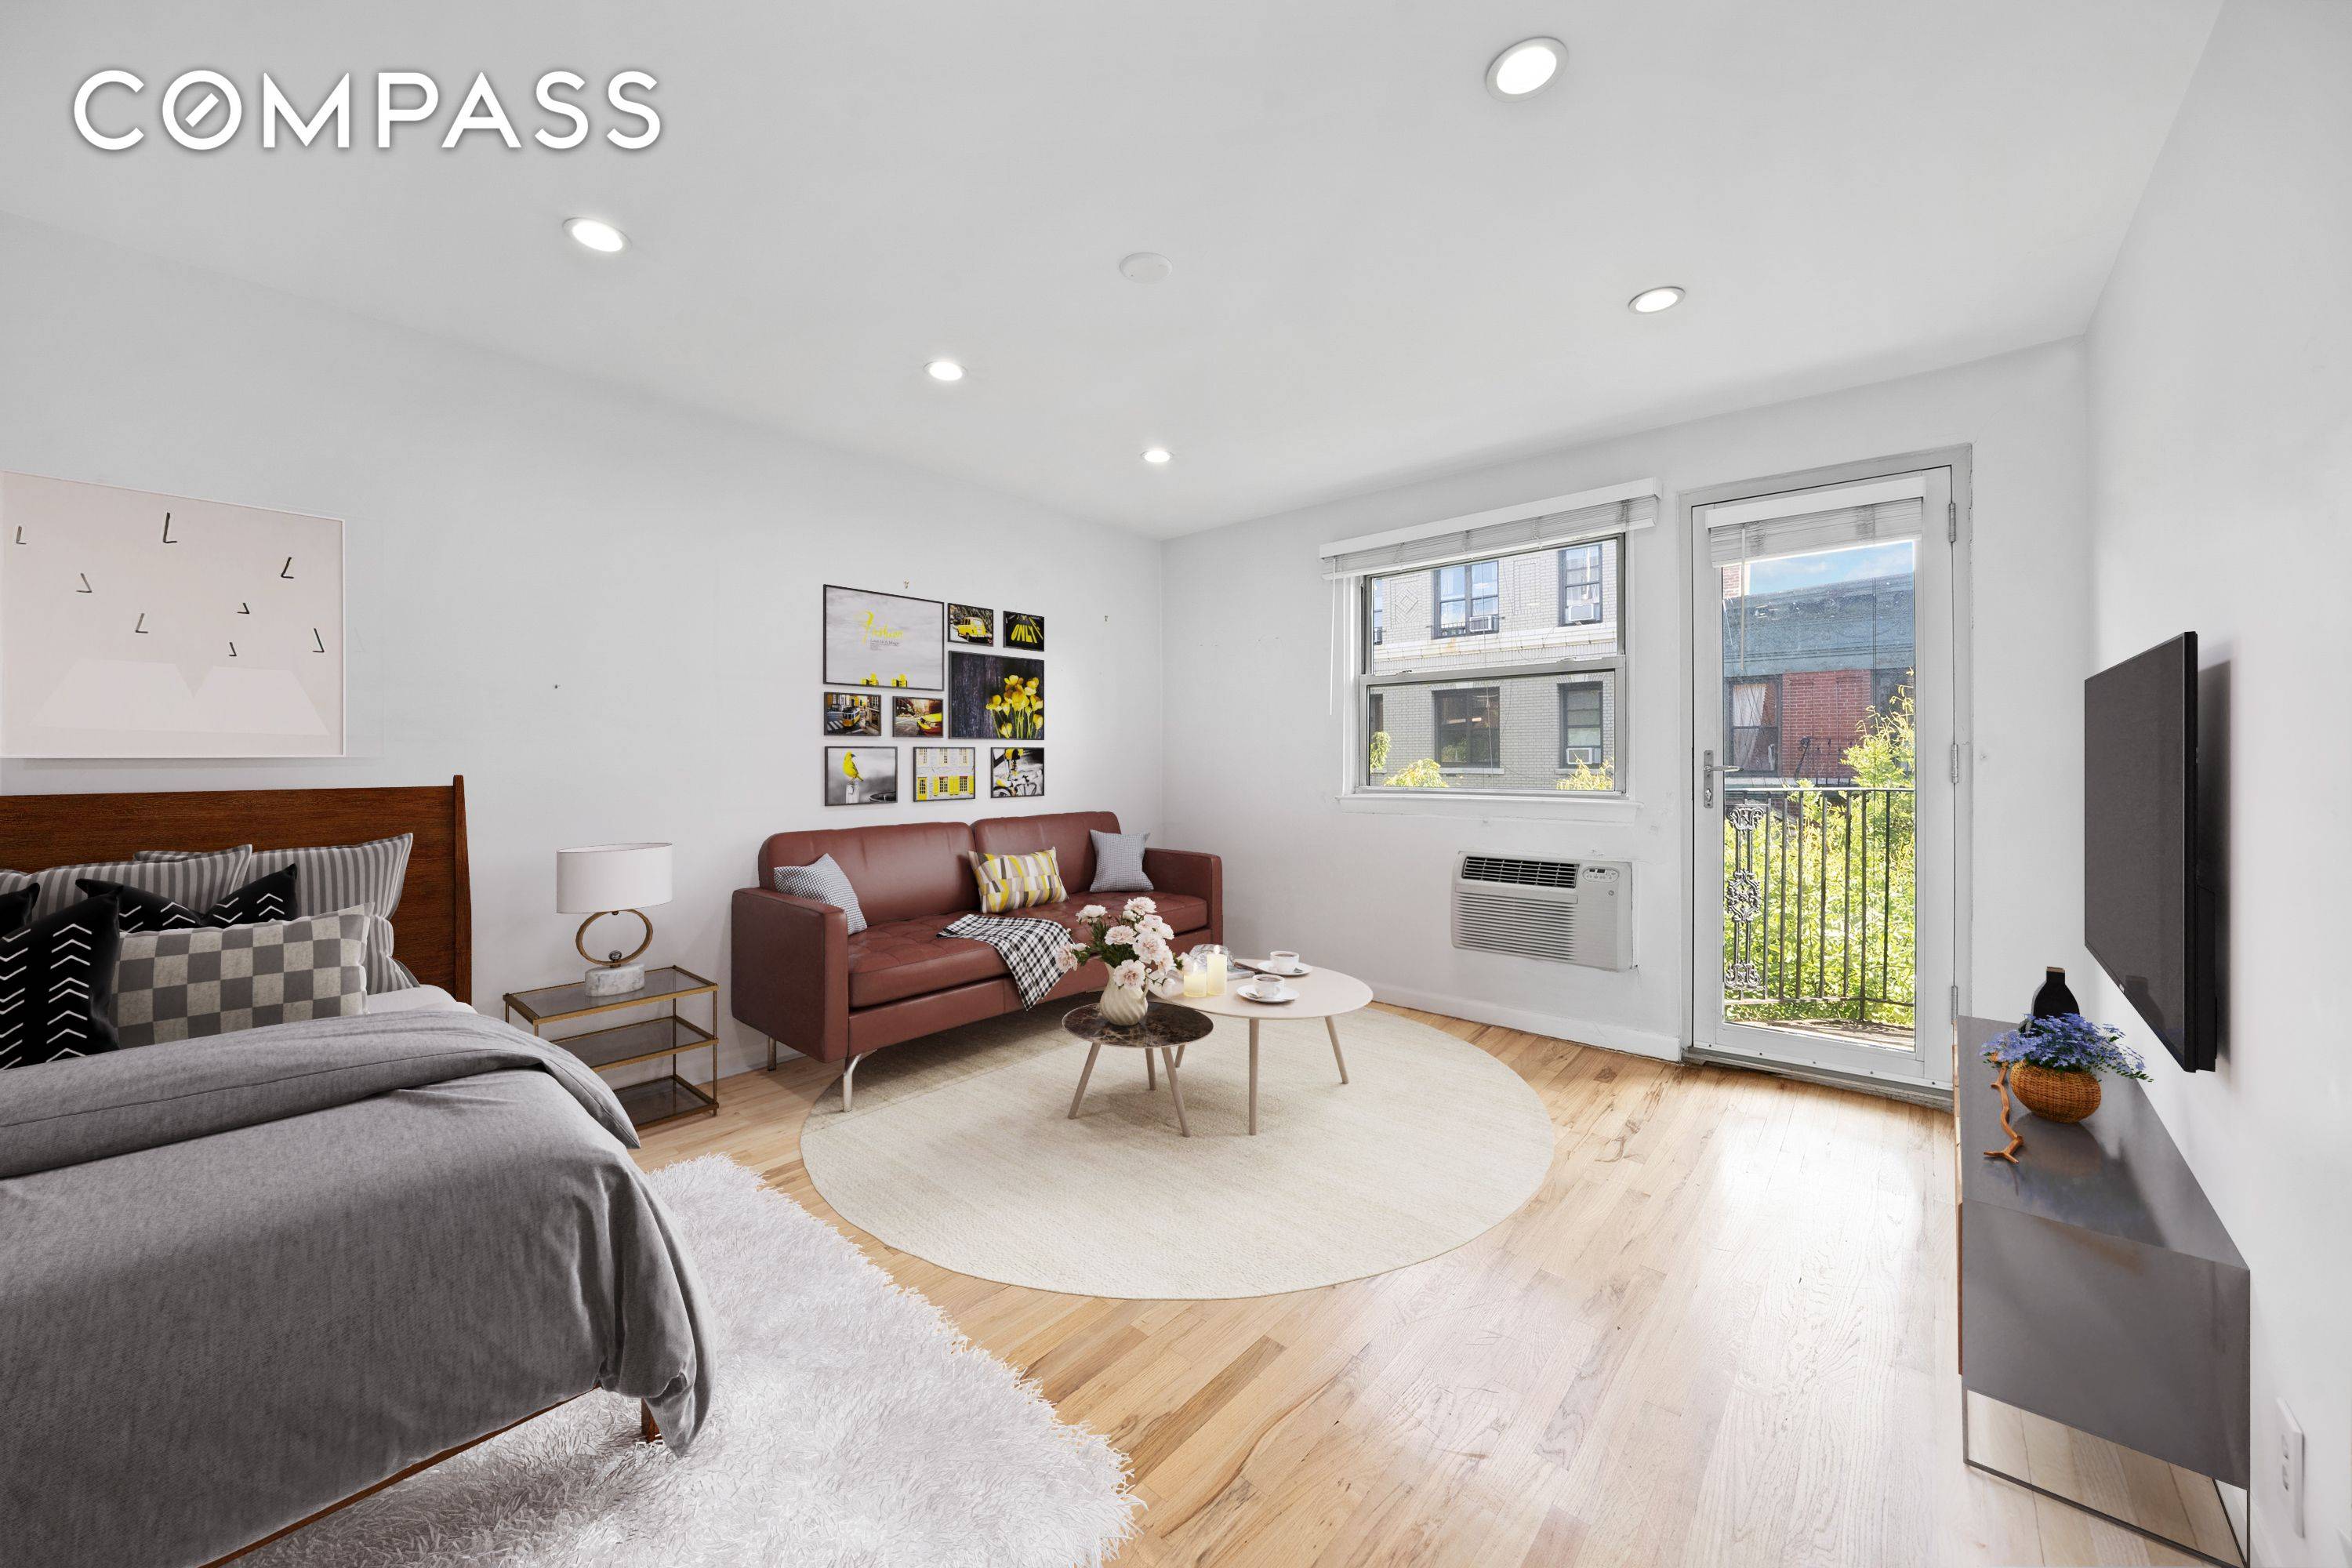 5L is a beautiful and bright studio in the heart of Greenwich Village.